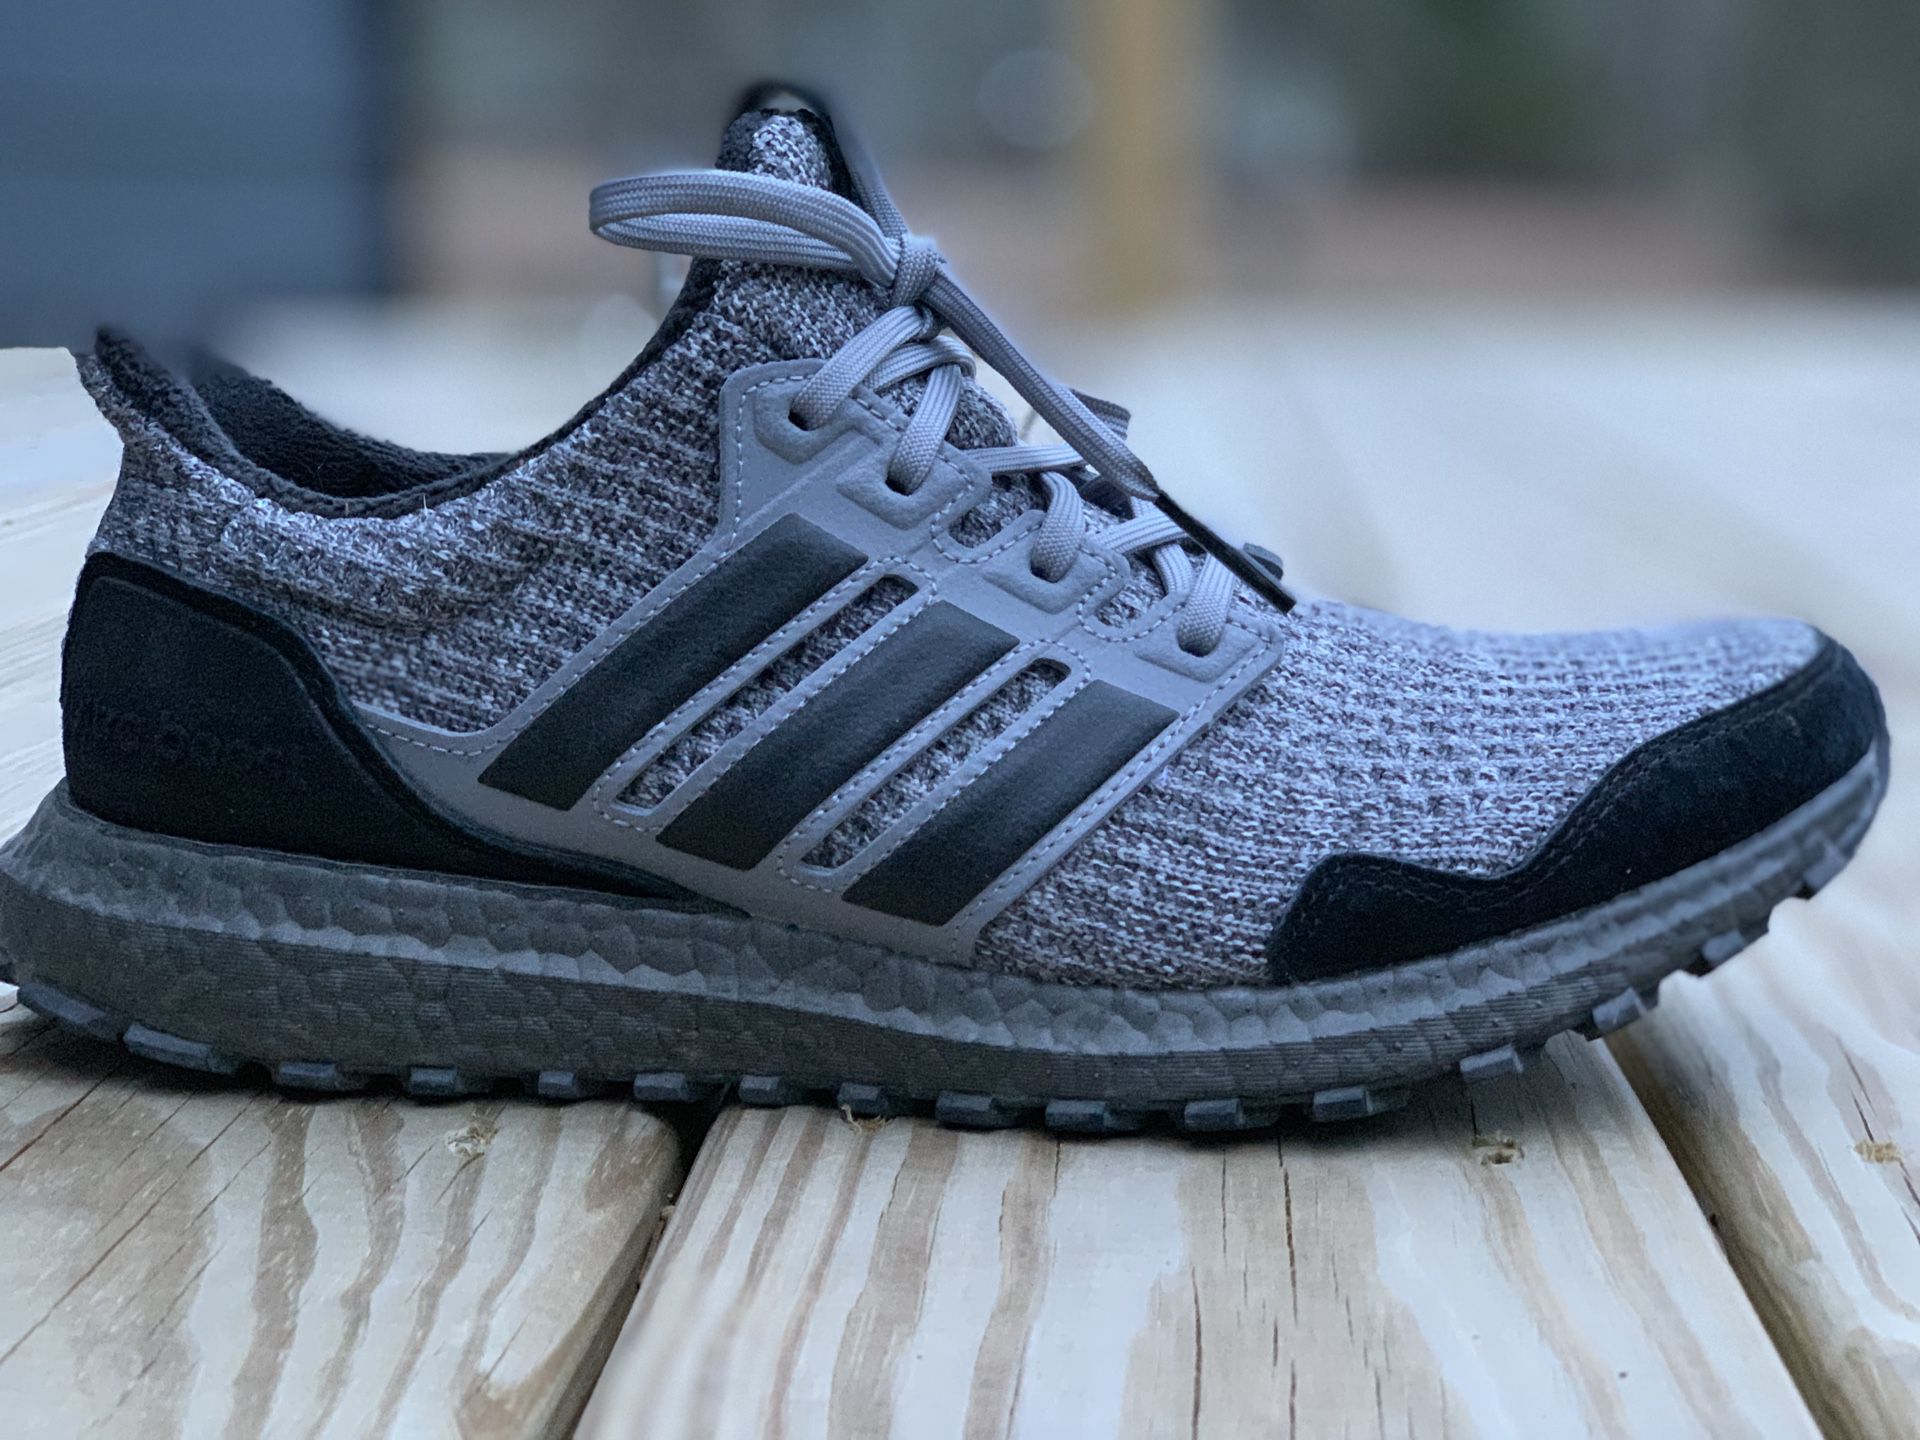 Adidas Boost 4.0 ,x Game of Thrones “Stark”